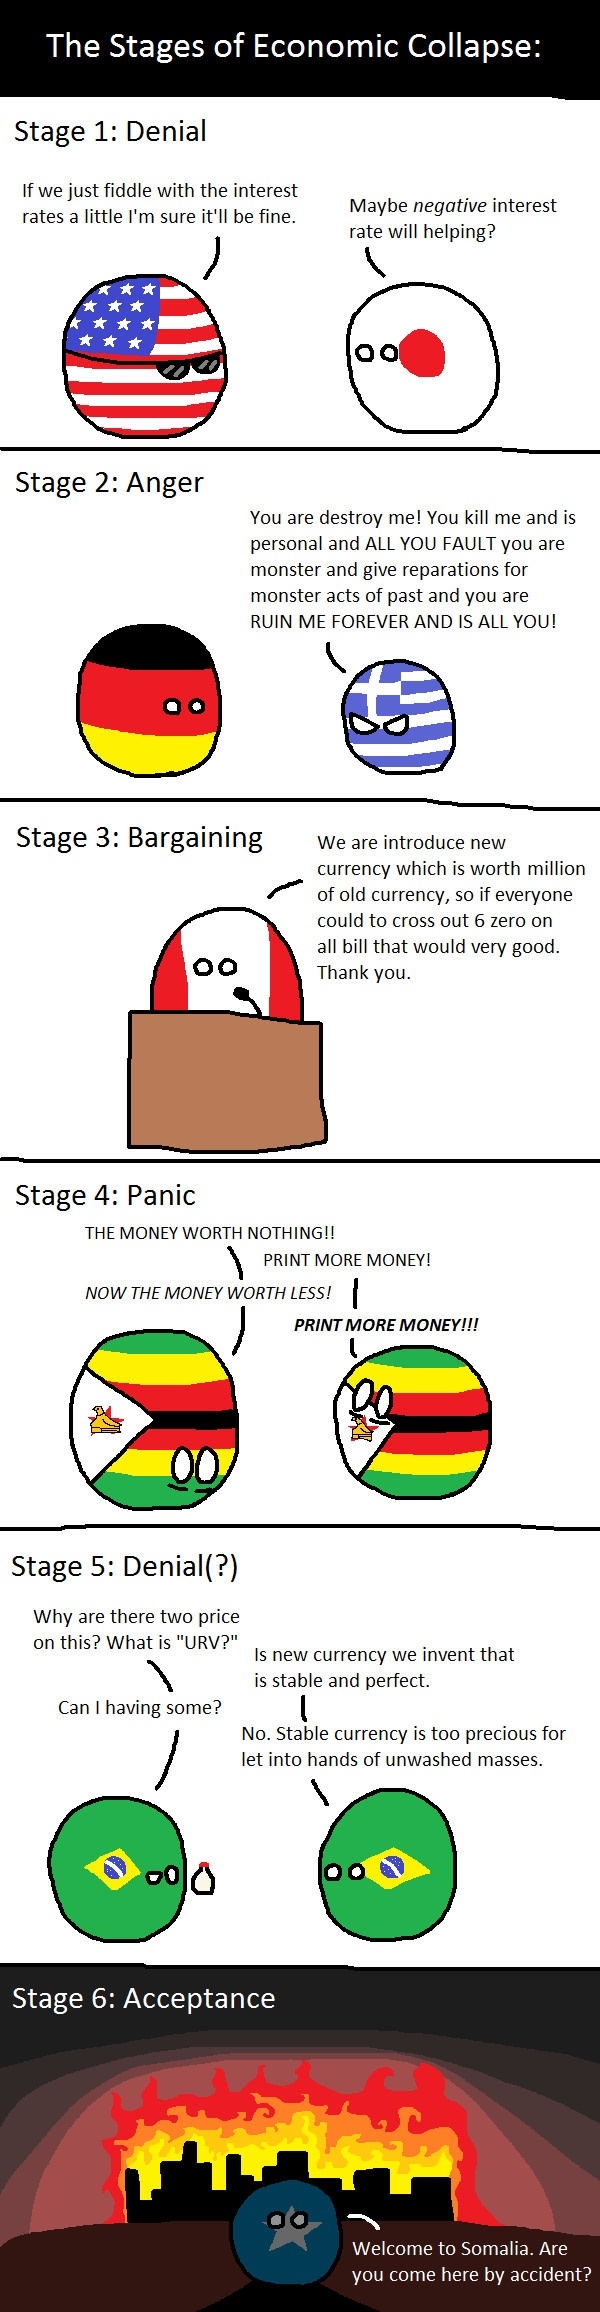 Stages of economic collapse